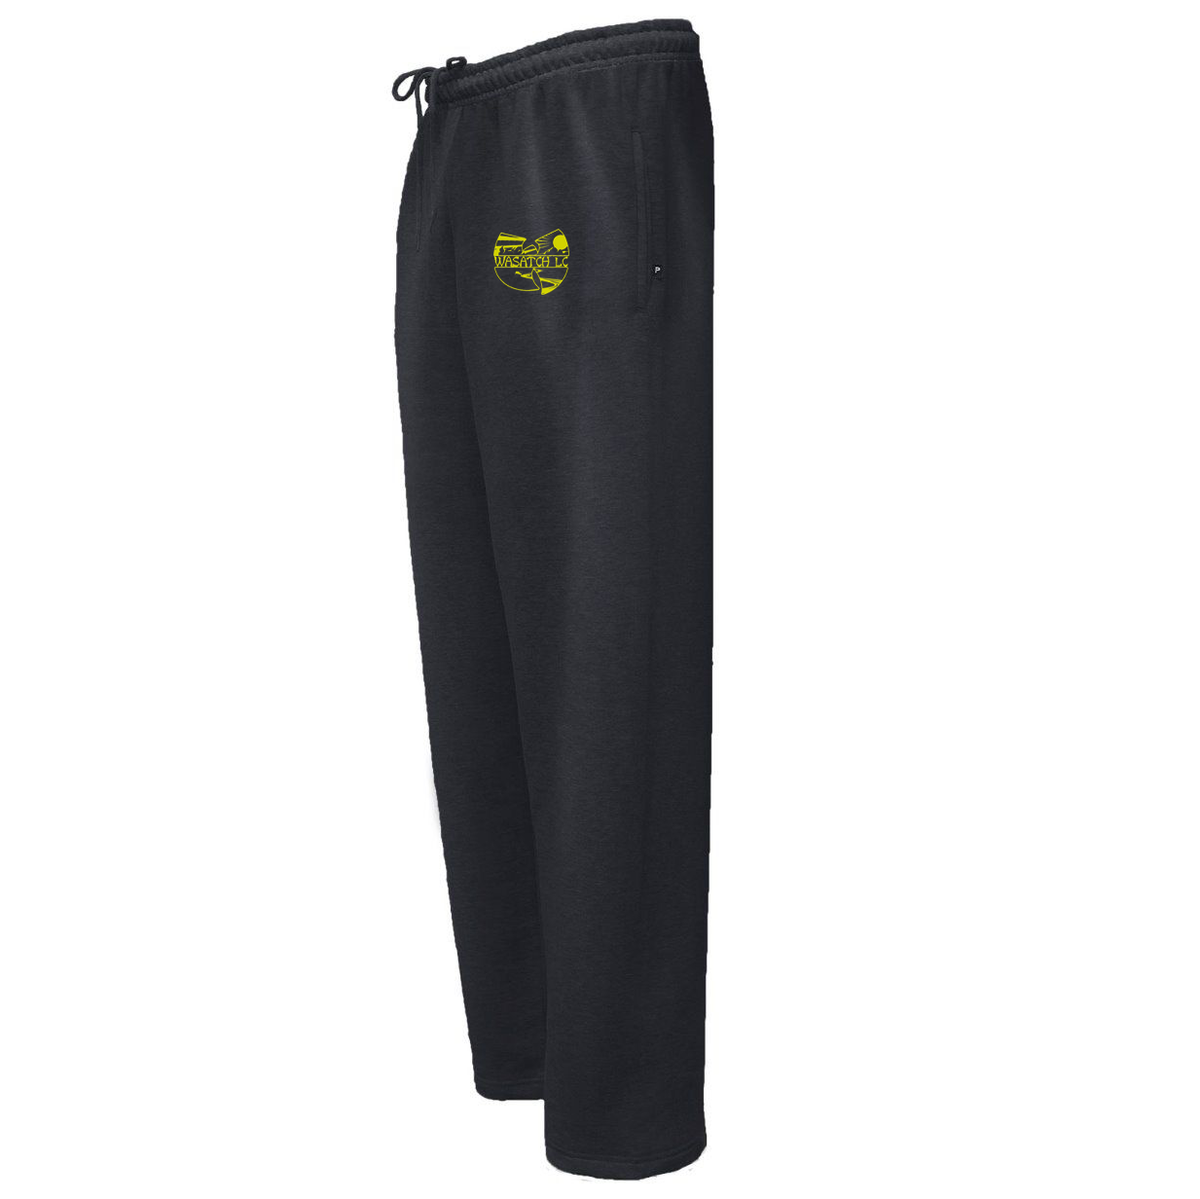 Wasatch LC Sweatpants